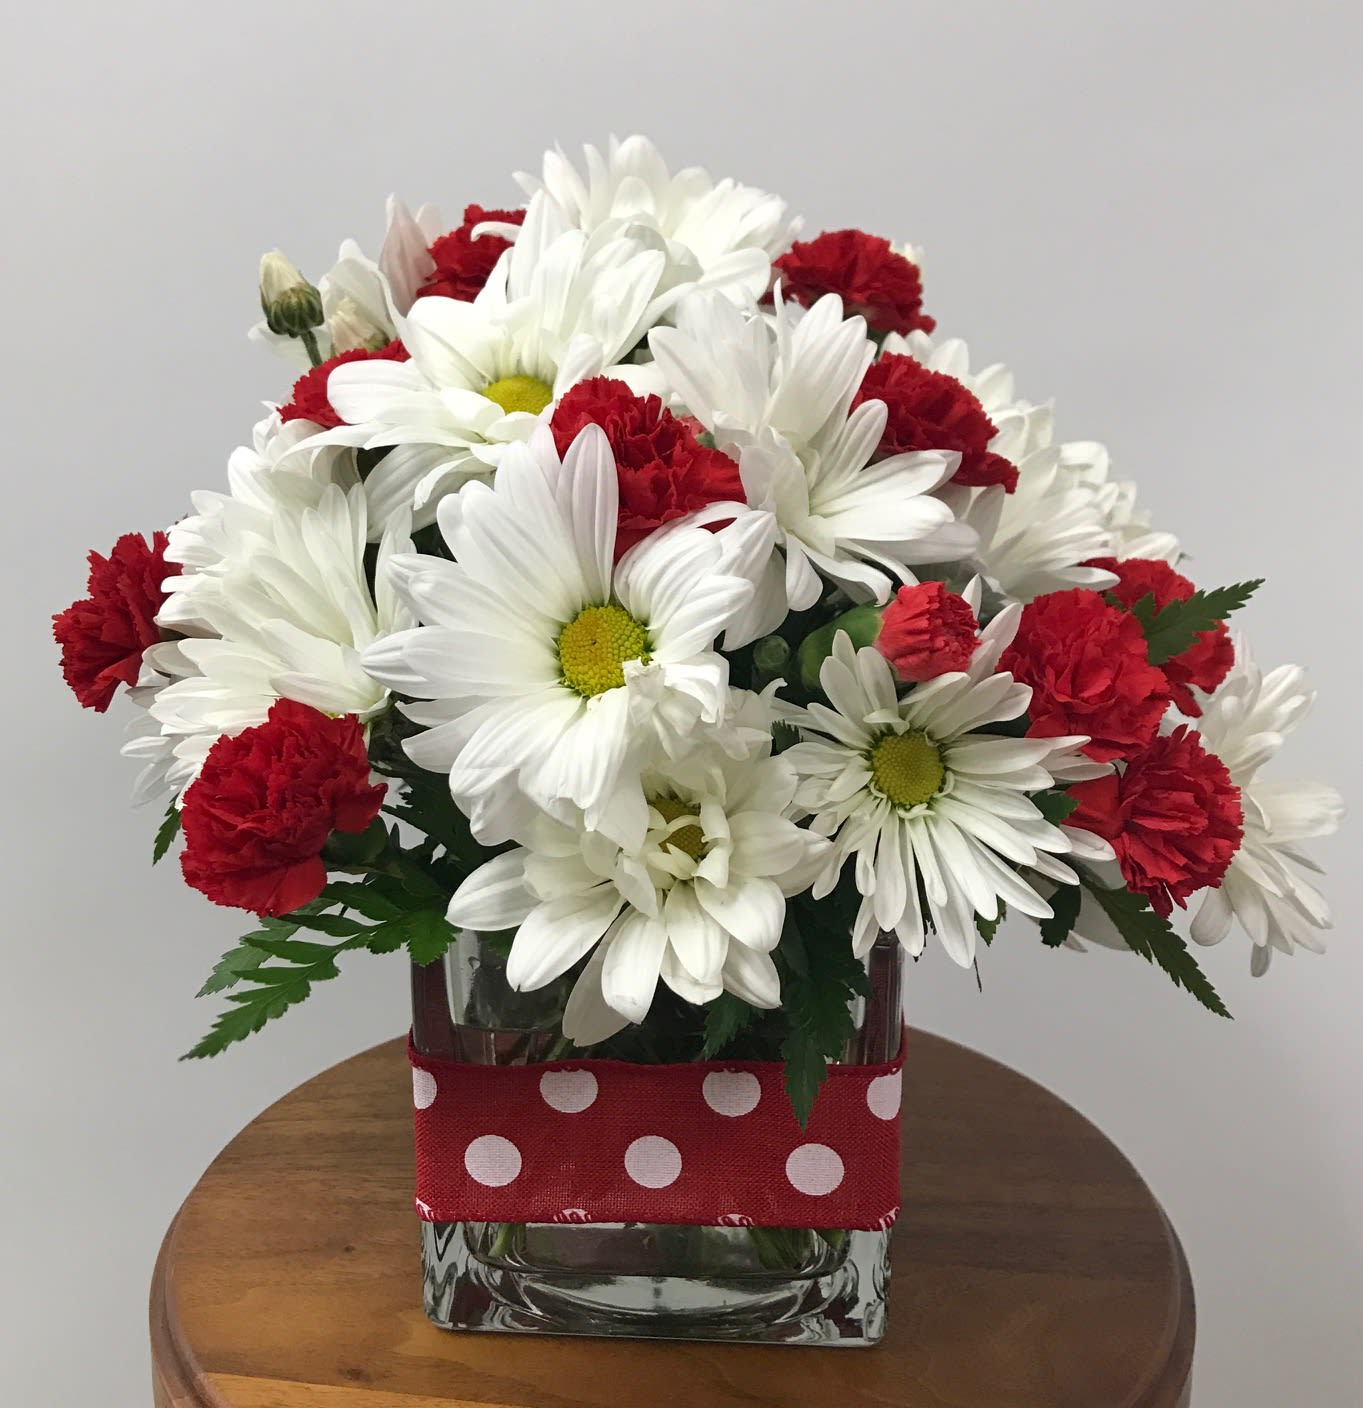  Polka Dots &amp; Posies - Polka dot ribbon wrapped around a clear cube with a bouquet of white daisies and red mini-carnations.  Just the right gift. Also available in pink and white.  